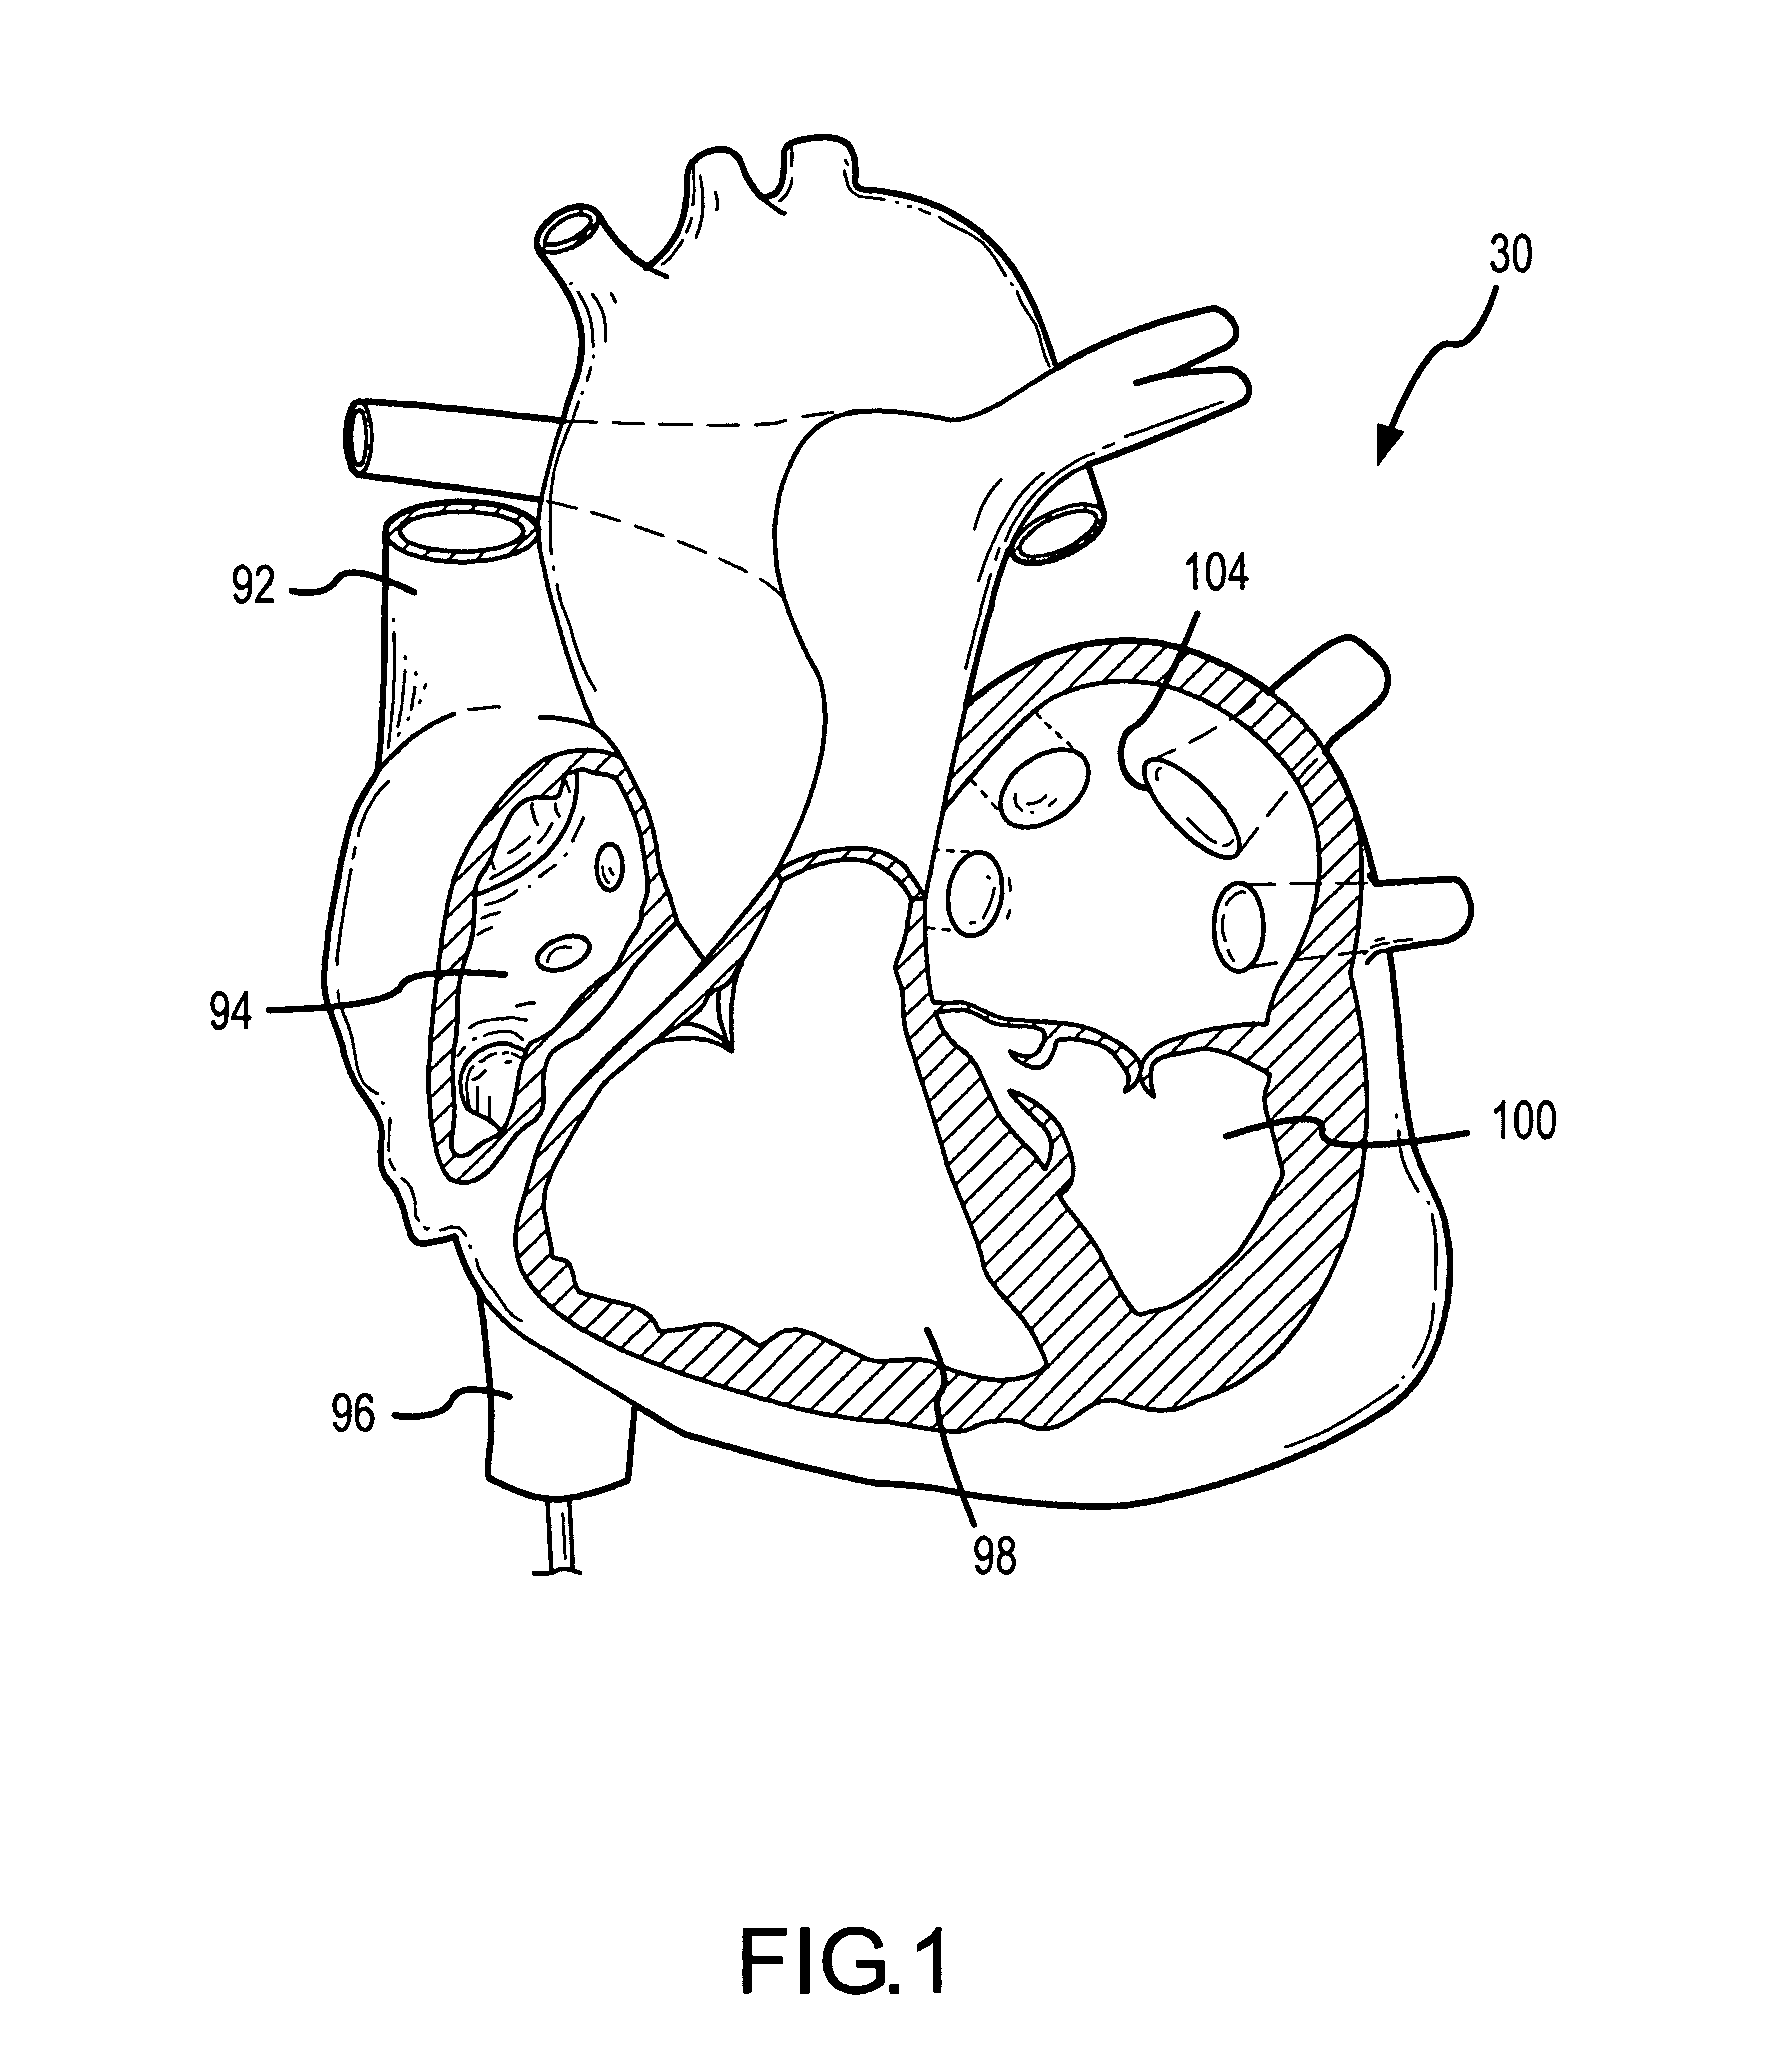 Position independent catheter